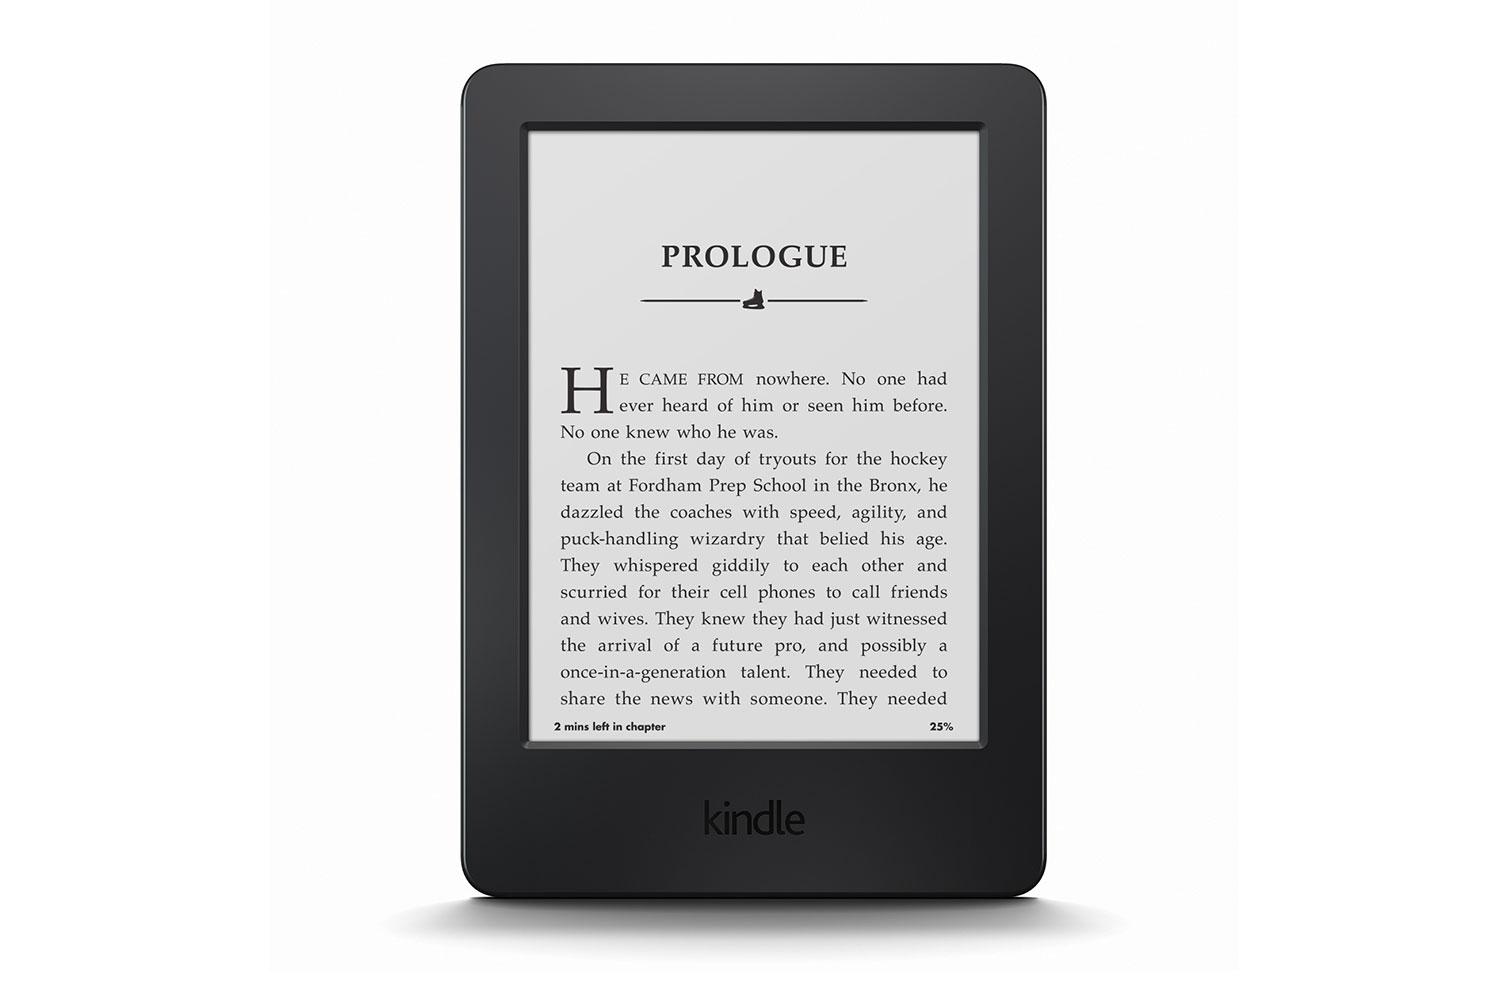 amazon launches high end voyage e reader kindle front press image